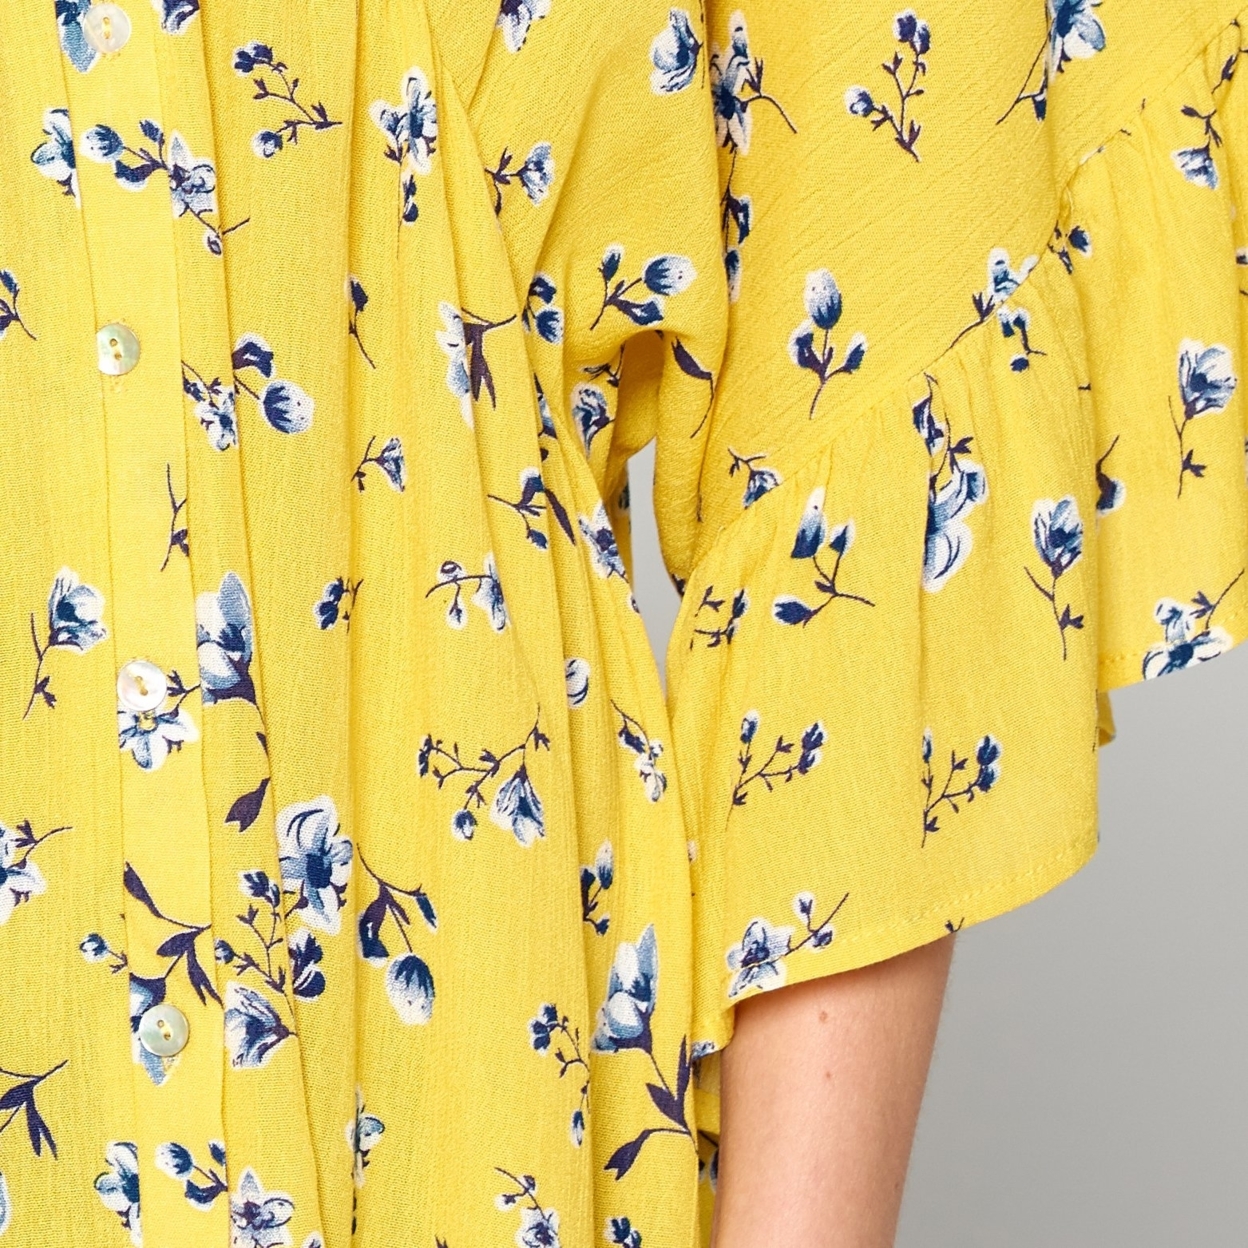 Calico Floral Woven Top - Mustard Yellow, Large (12-14)